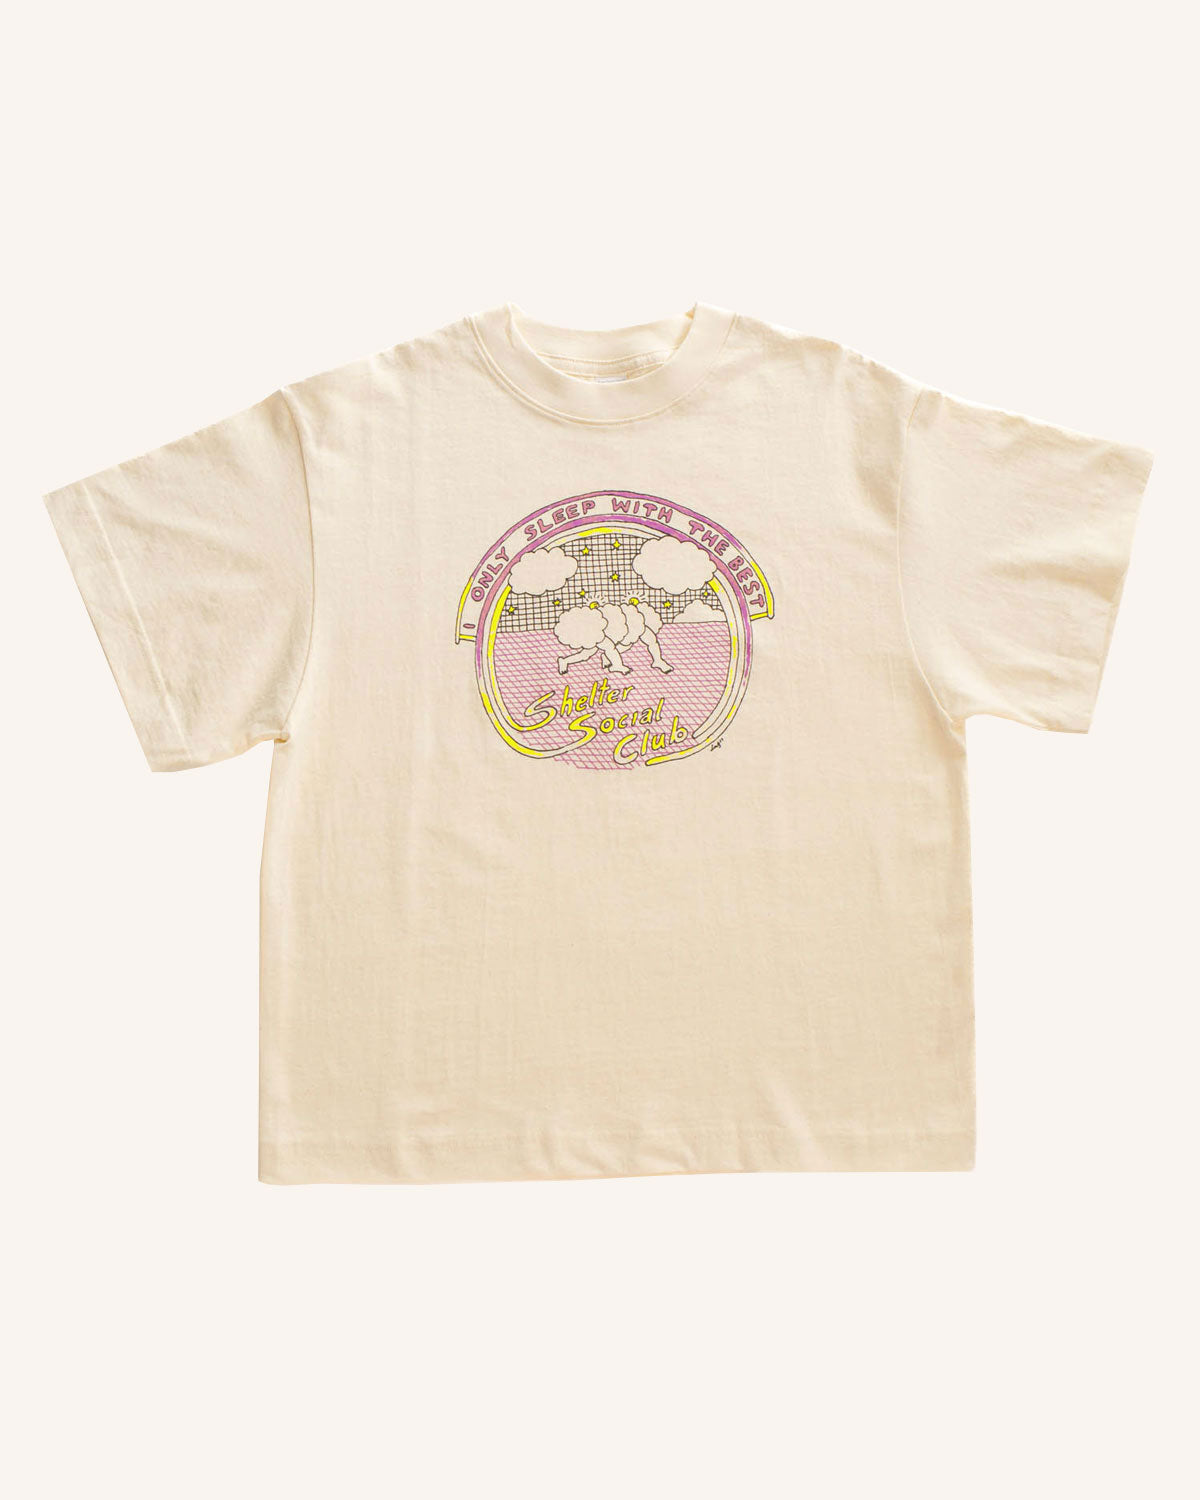 Only Sleep with the Best SS Tee - Shelter Social Club